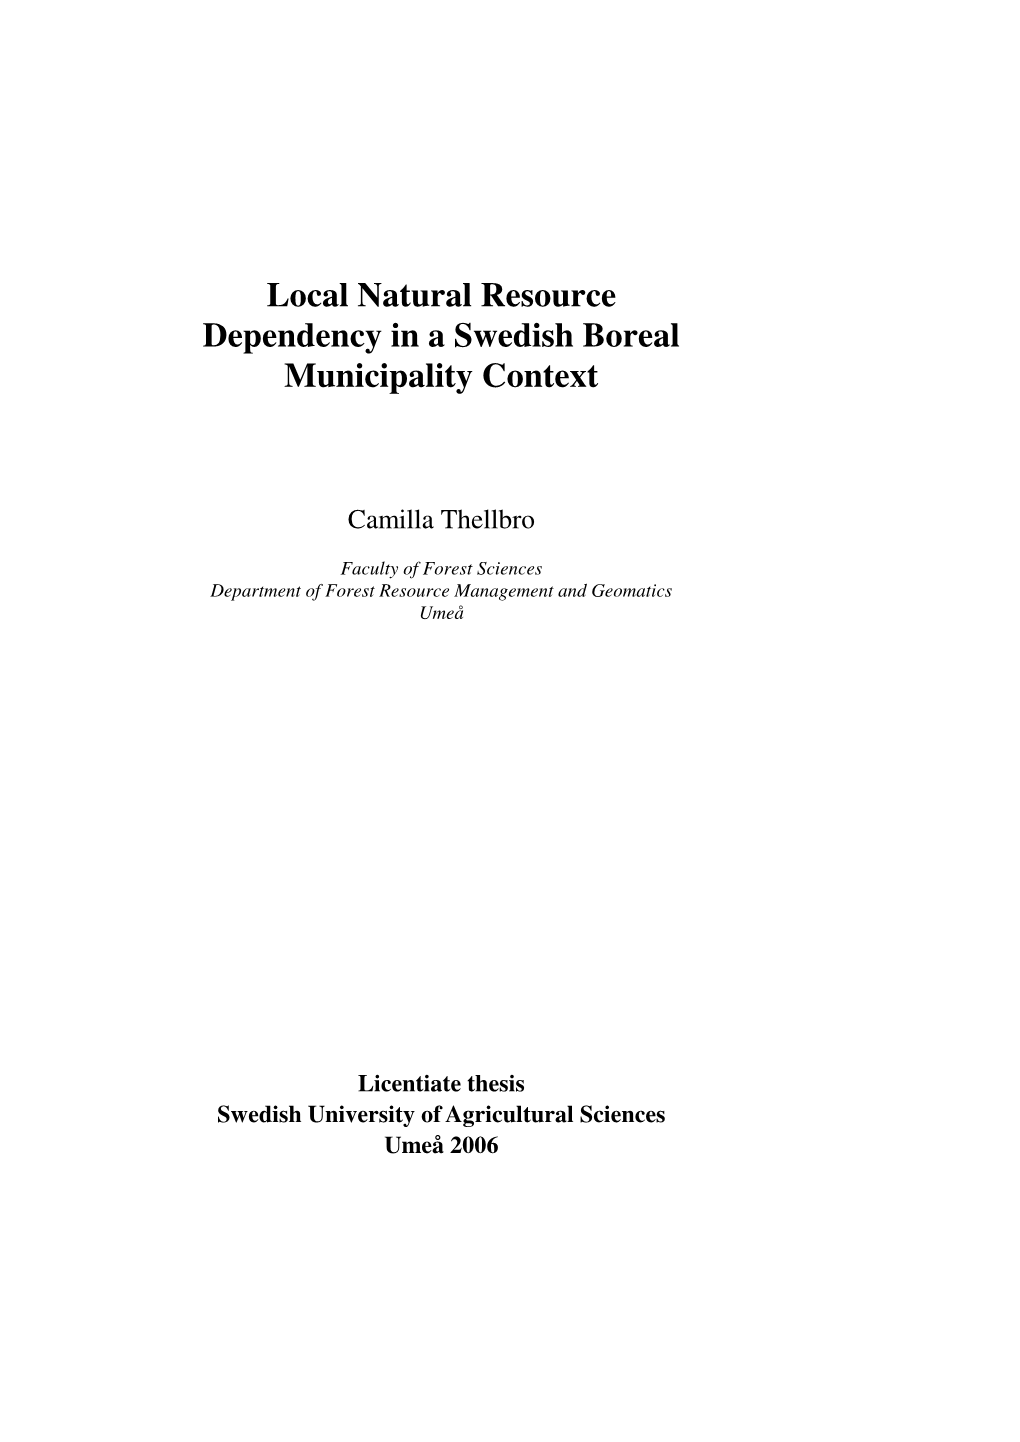 Local Natural Resource Dependency in a Swedish Boreal Municipality Context